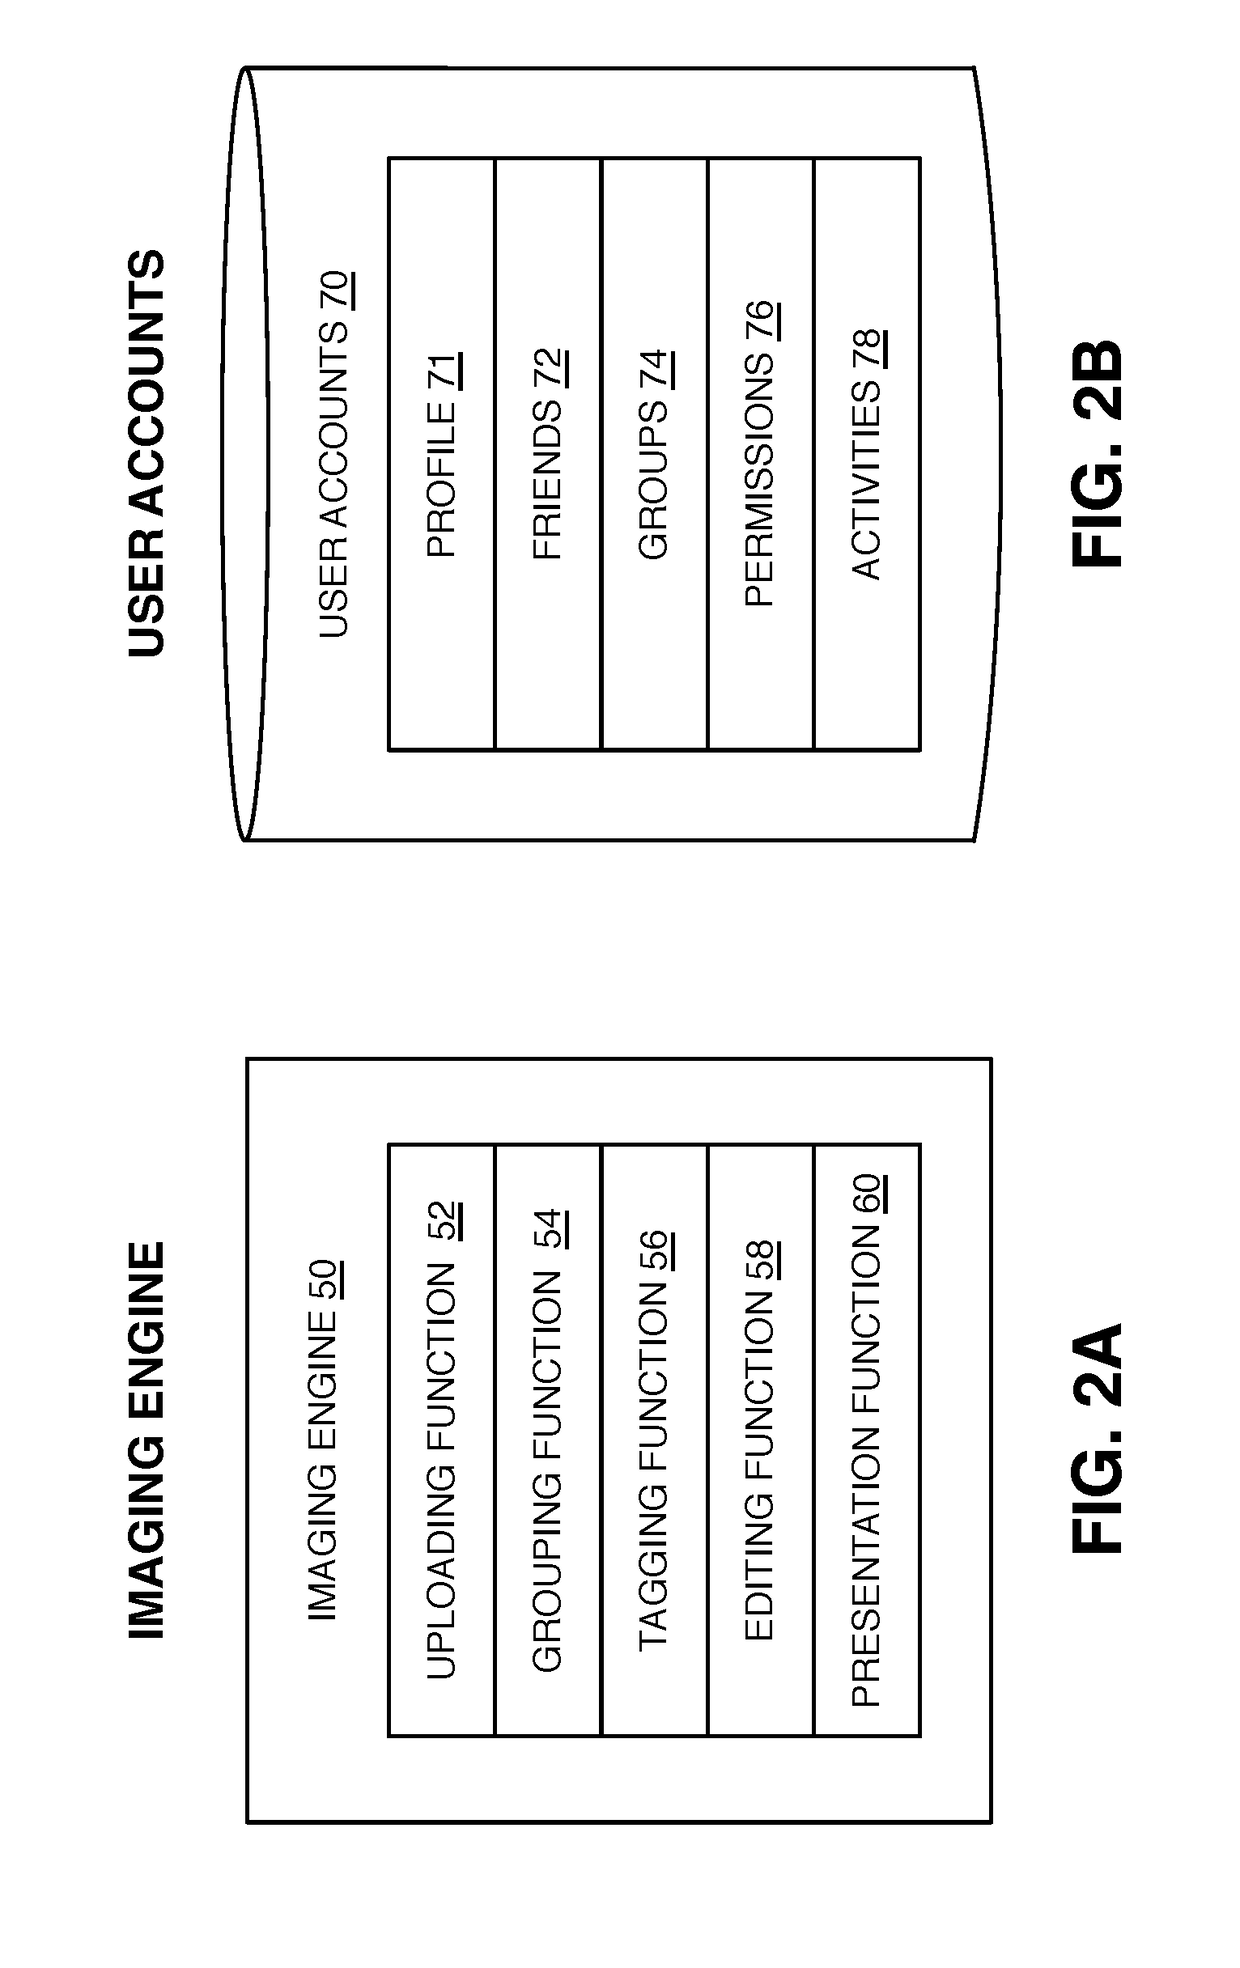 Method And System For Image Tagging In A Social Network